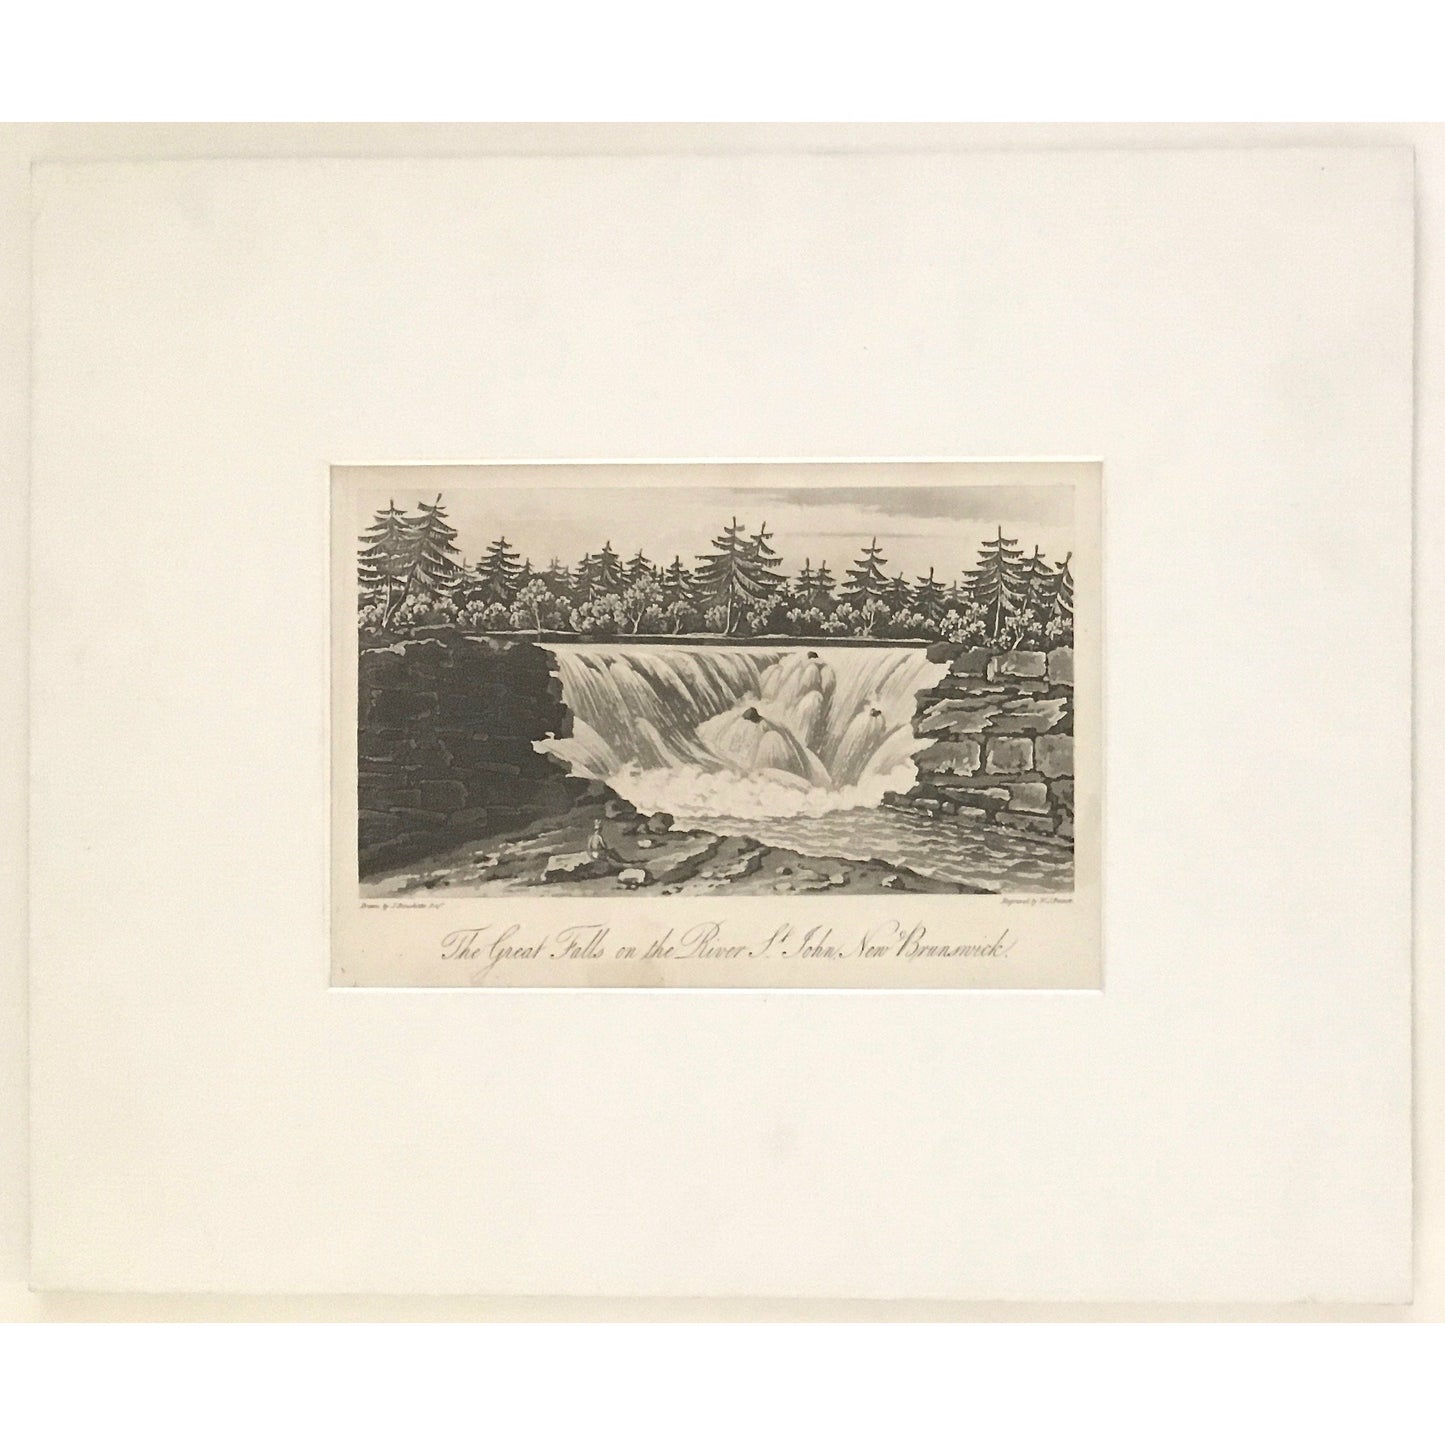 Great Falls, Great, Falls, River St. John, St. John's River, St. John's, New Brunswick, Waterfall, Falls, native, waterway, A Topographical Description of the Province of Lower Canada, Lower Canada, Joseph Bouchette, Bouchette, 1815, W. Faden, Faden, W. J. Bennett, Bennett, Charing Cross, London, steel engraving, black and white, matted, Original, Antique, Prints, Old Prints, Old Books, Rare Prints, Rare Books, Canadiana, Canadian History, Art, Decor, Engraving,